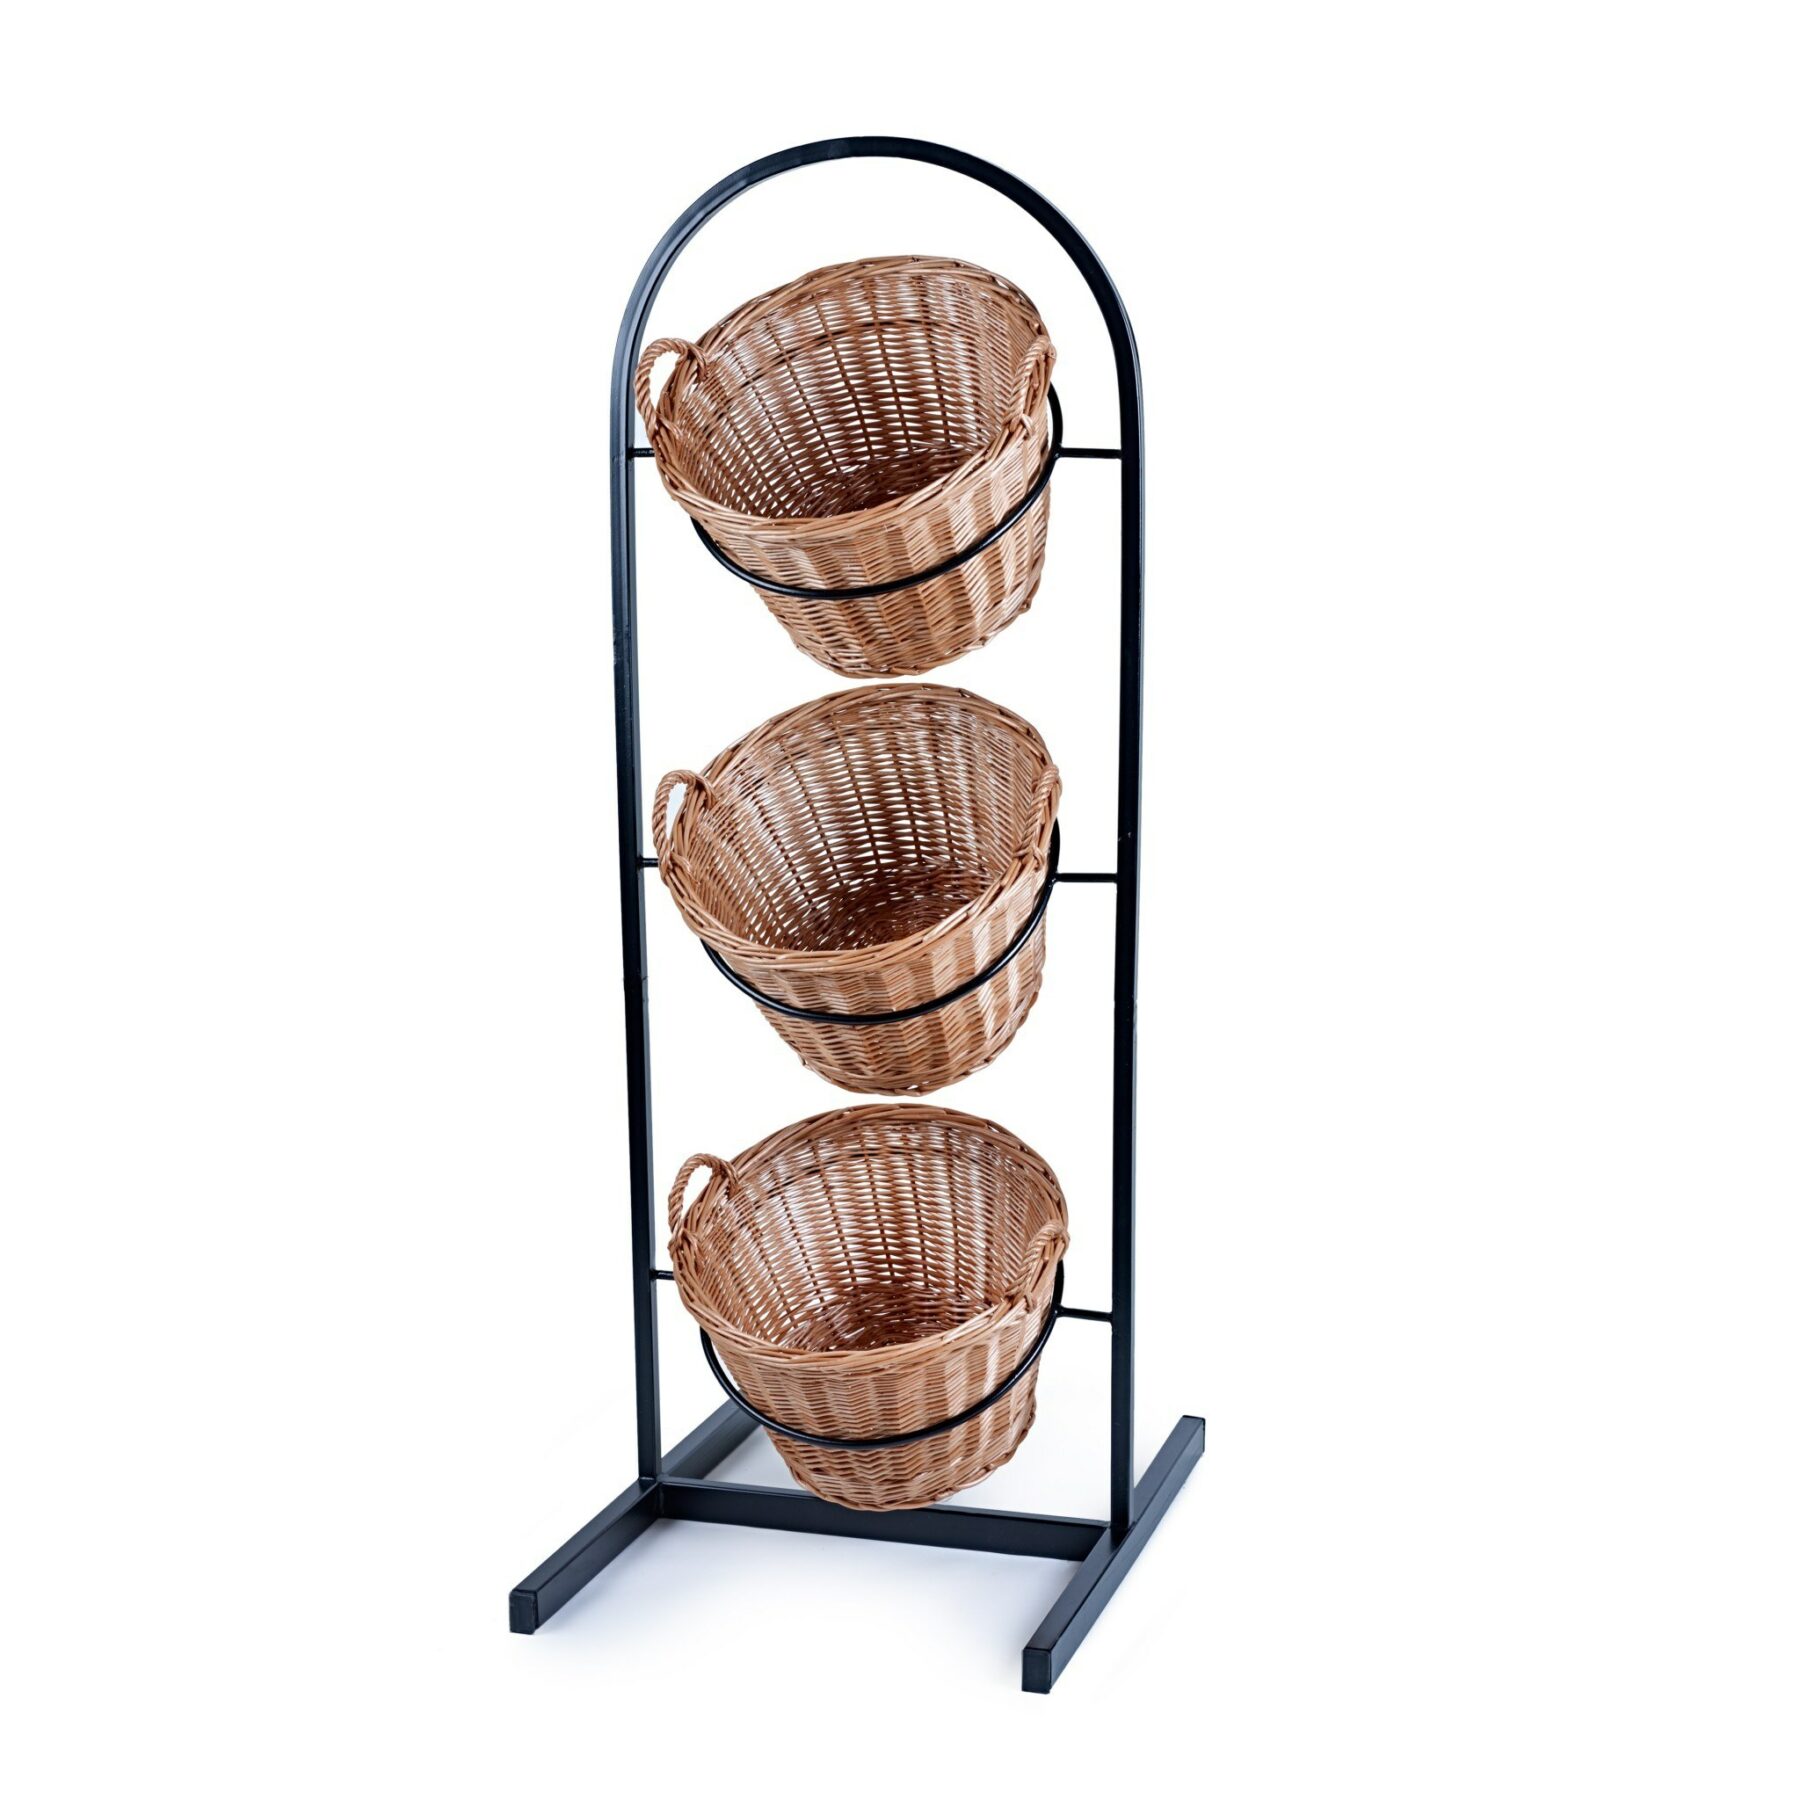 3 Tier Metal Display Stand with Baskets